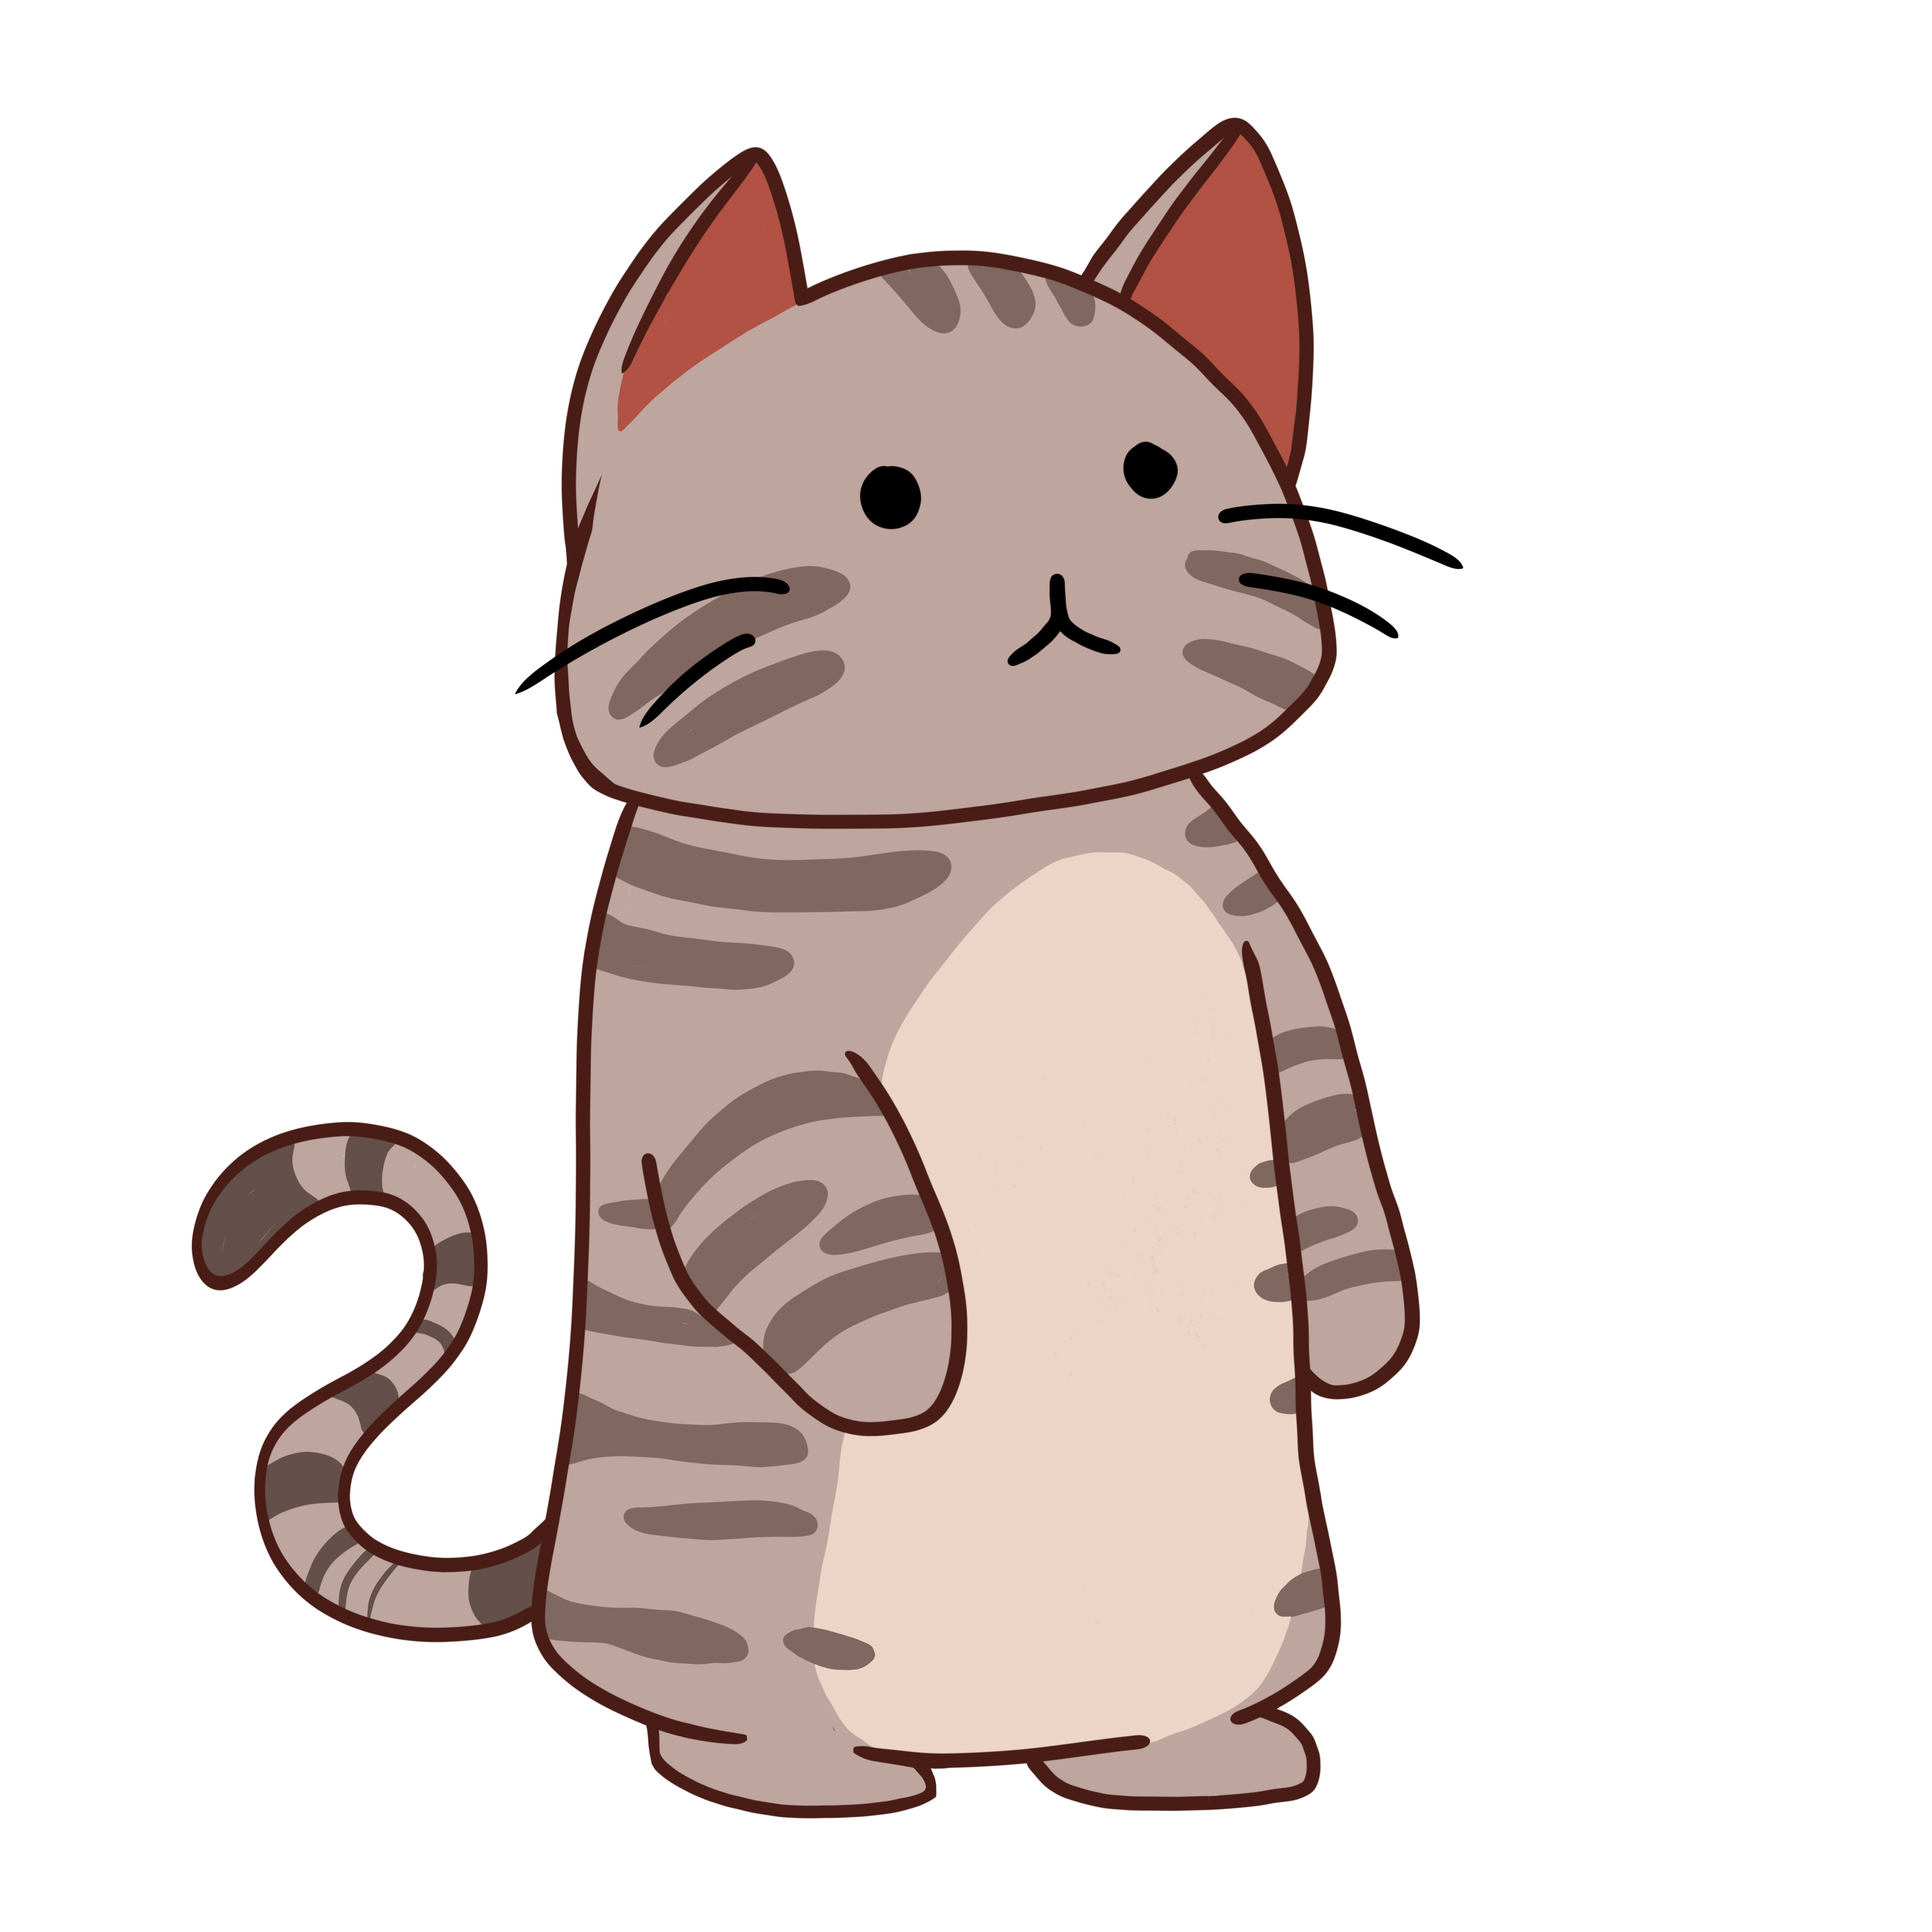 Draw your cat as a cartoon by Bmangos | Fiverr